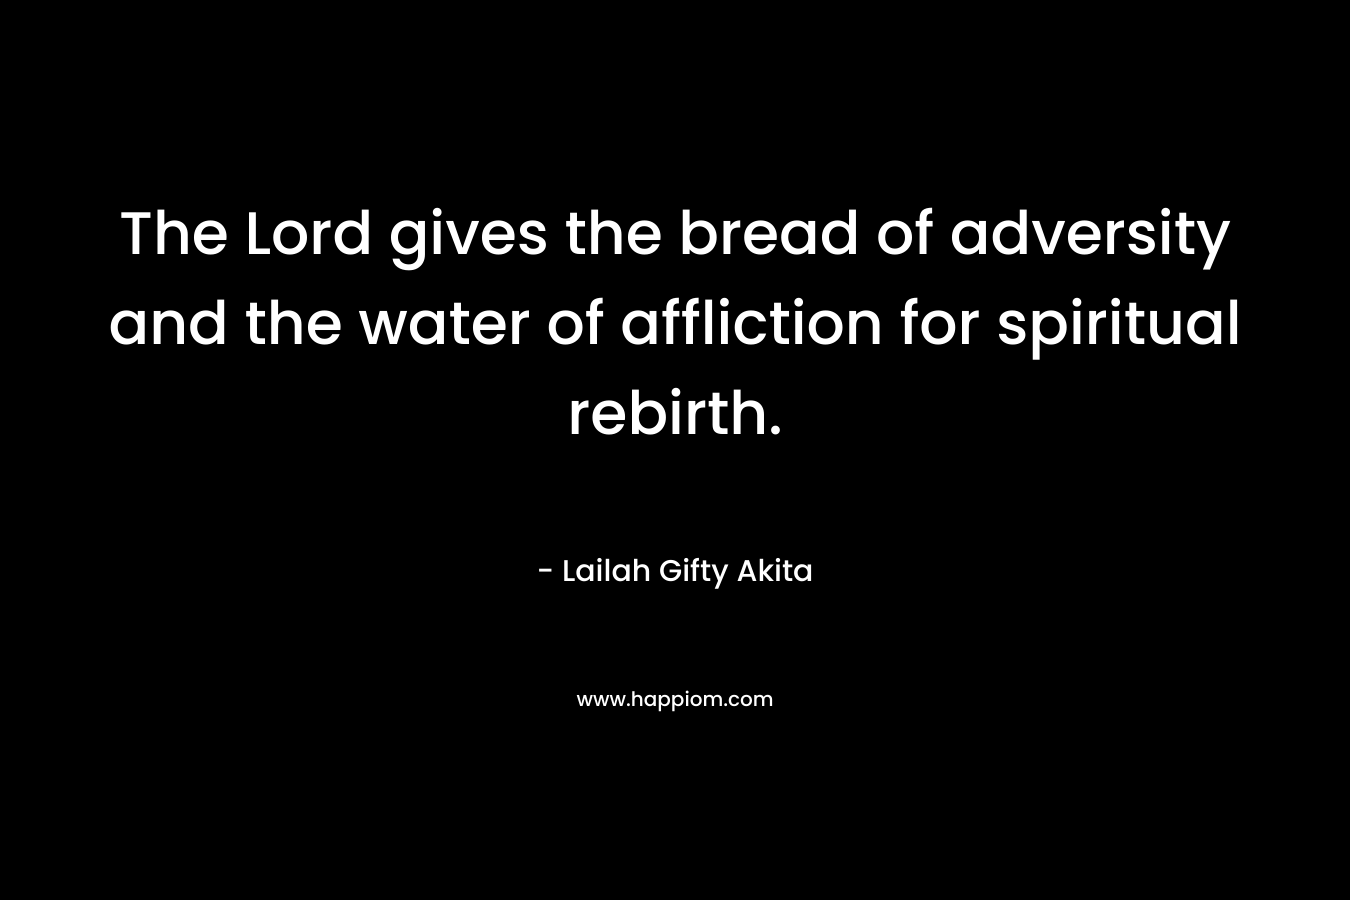 The Lord gives the bread of adversity and the water of affliction for spiritual rebirth. – Lailah Gifty Akita